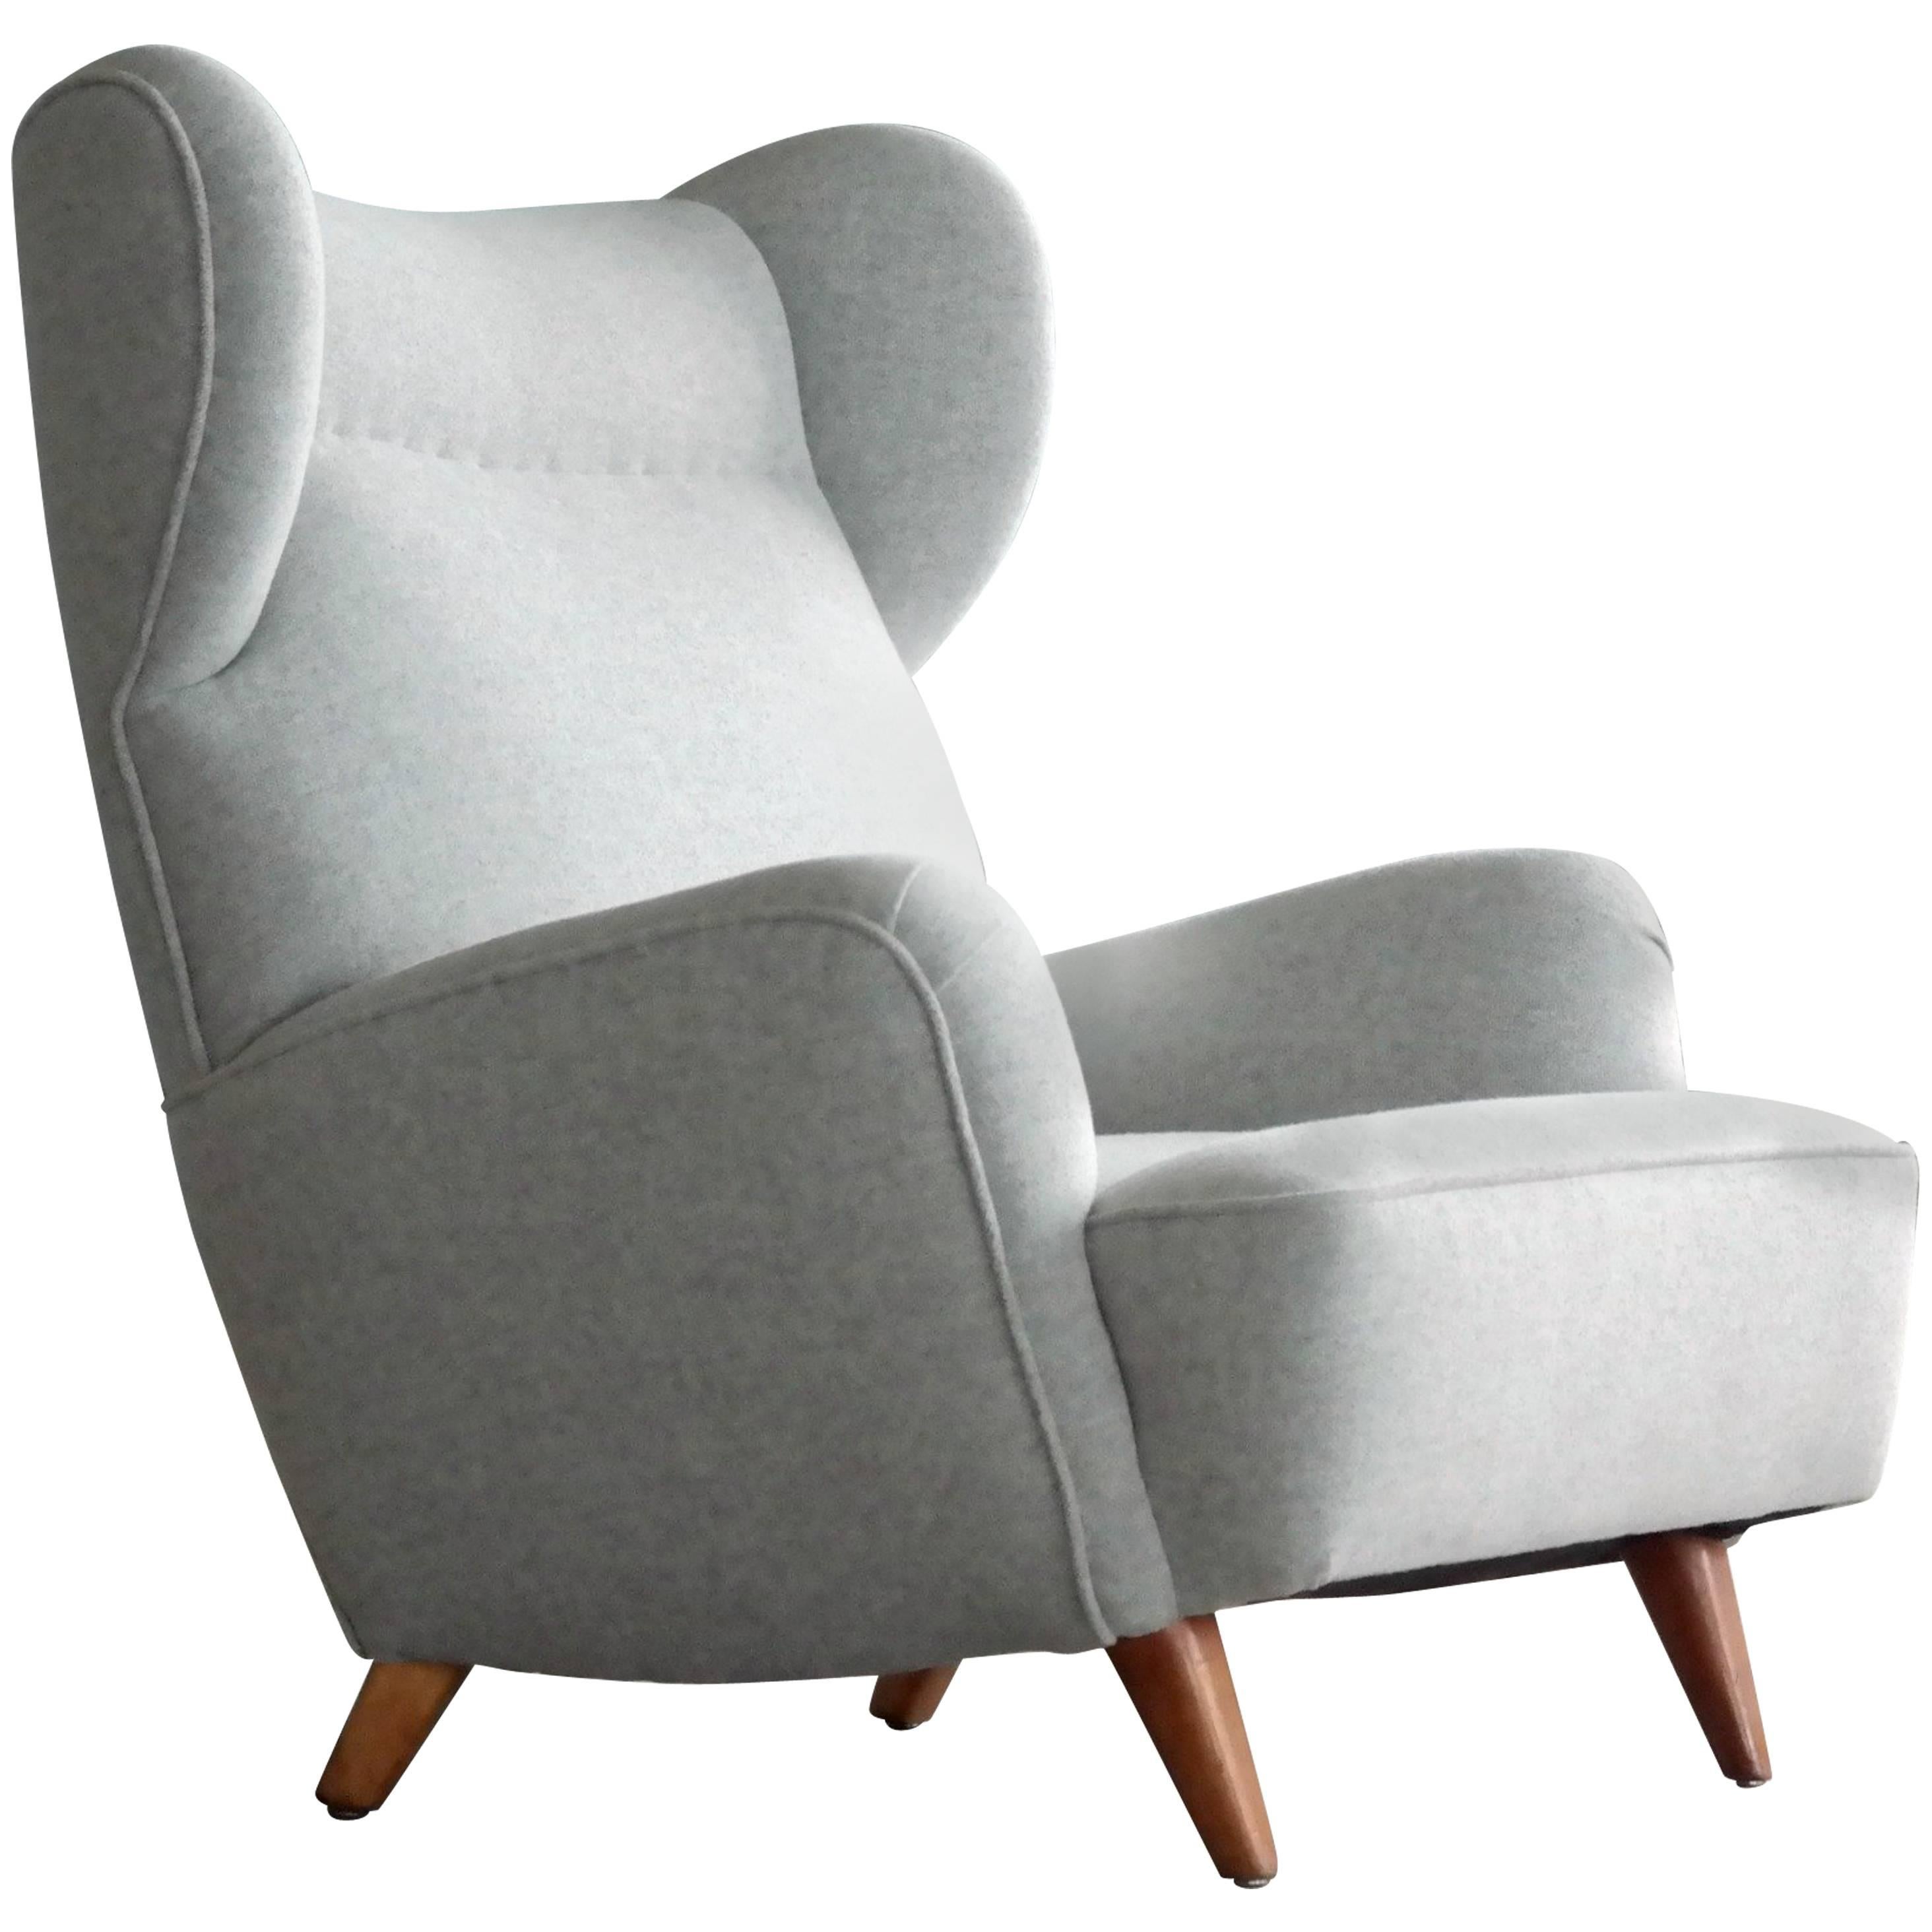 Gio Ponti Style Midcentury Lounge Chair Re-Upholstered in Kvadrat Wool